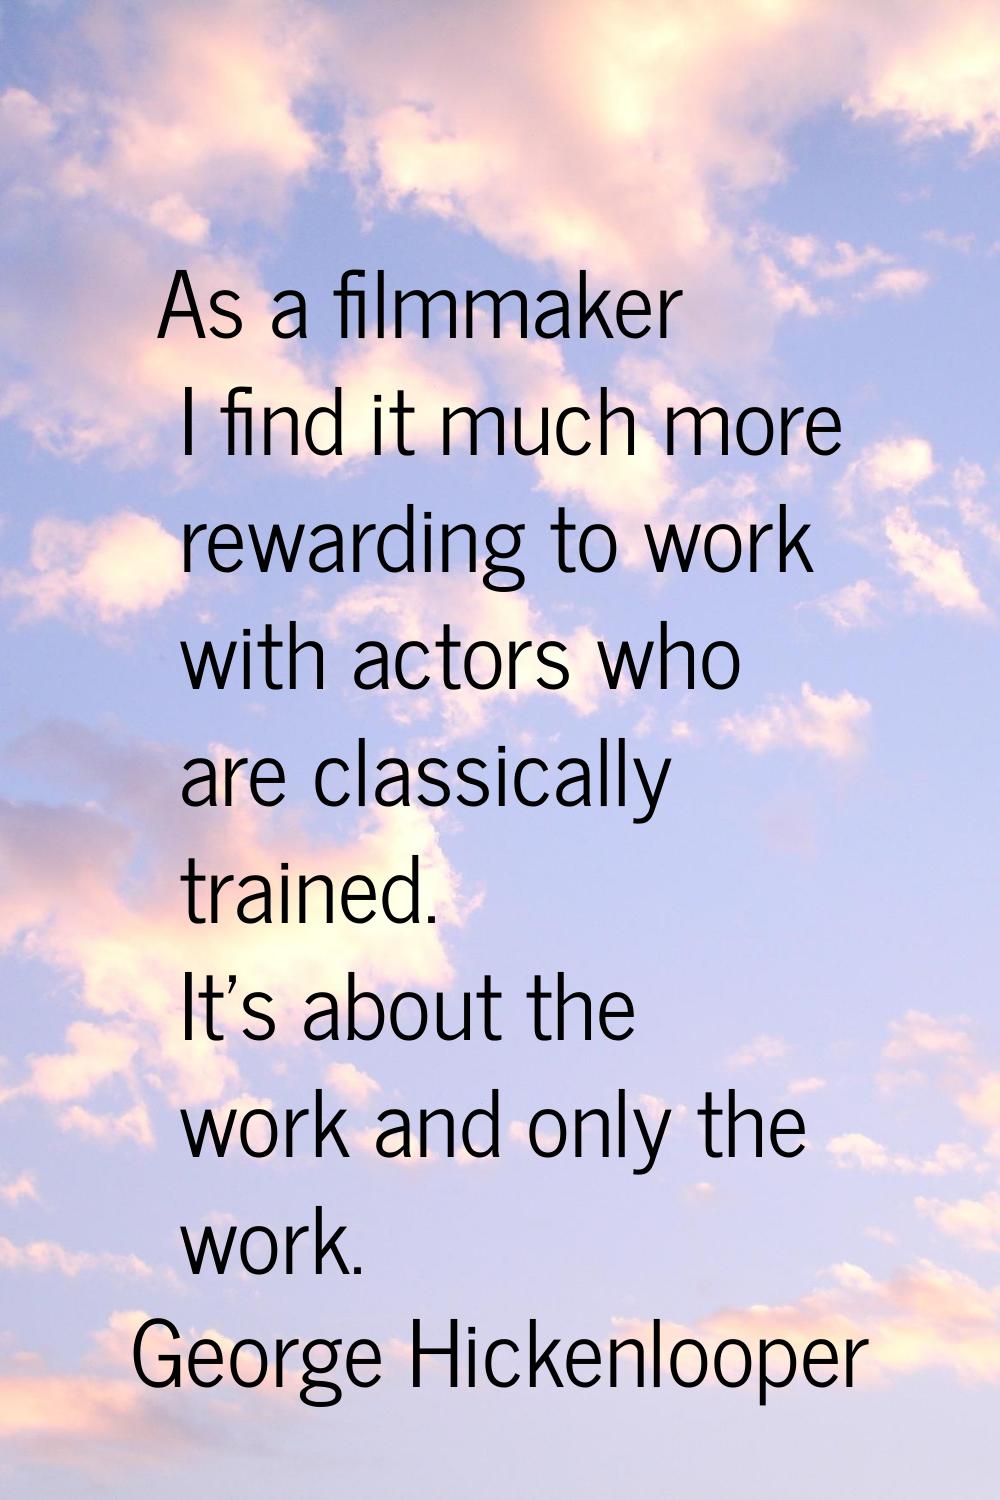 As a filmmaker I find it much more rewarding to work with actors who are classically trained. It's 